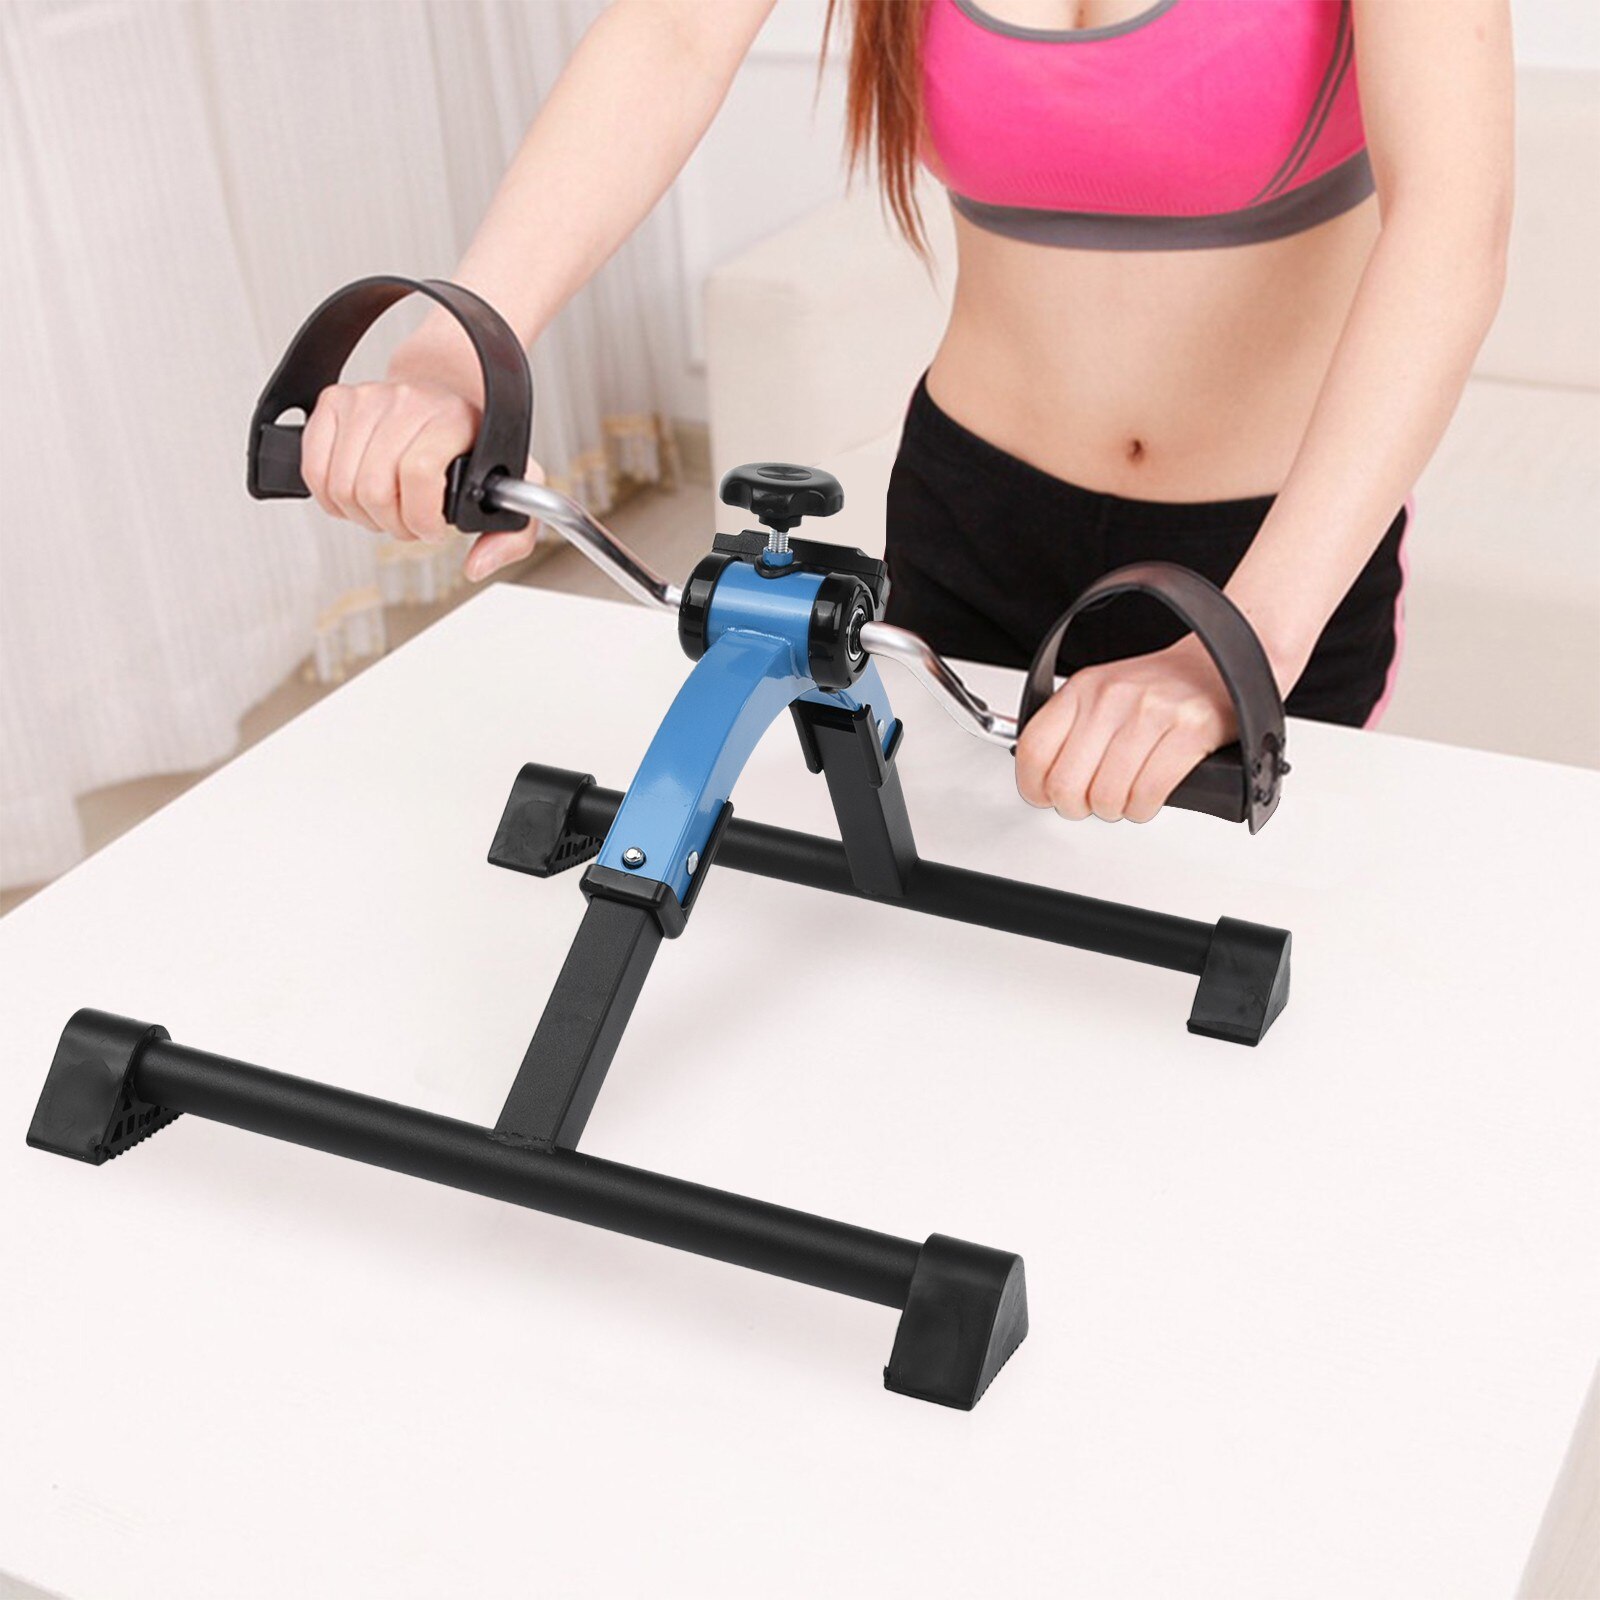 US STORE Unisex Mini Leg Fitness Equipment With Digital Device Multi Level Resistance Canexercise Muscle Mini Fitness Pedal